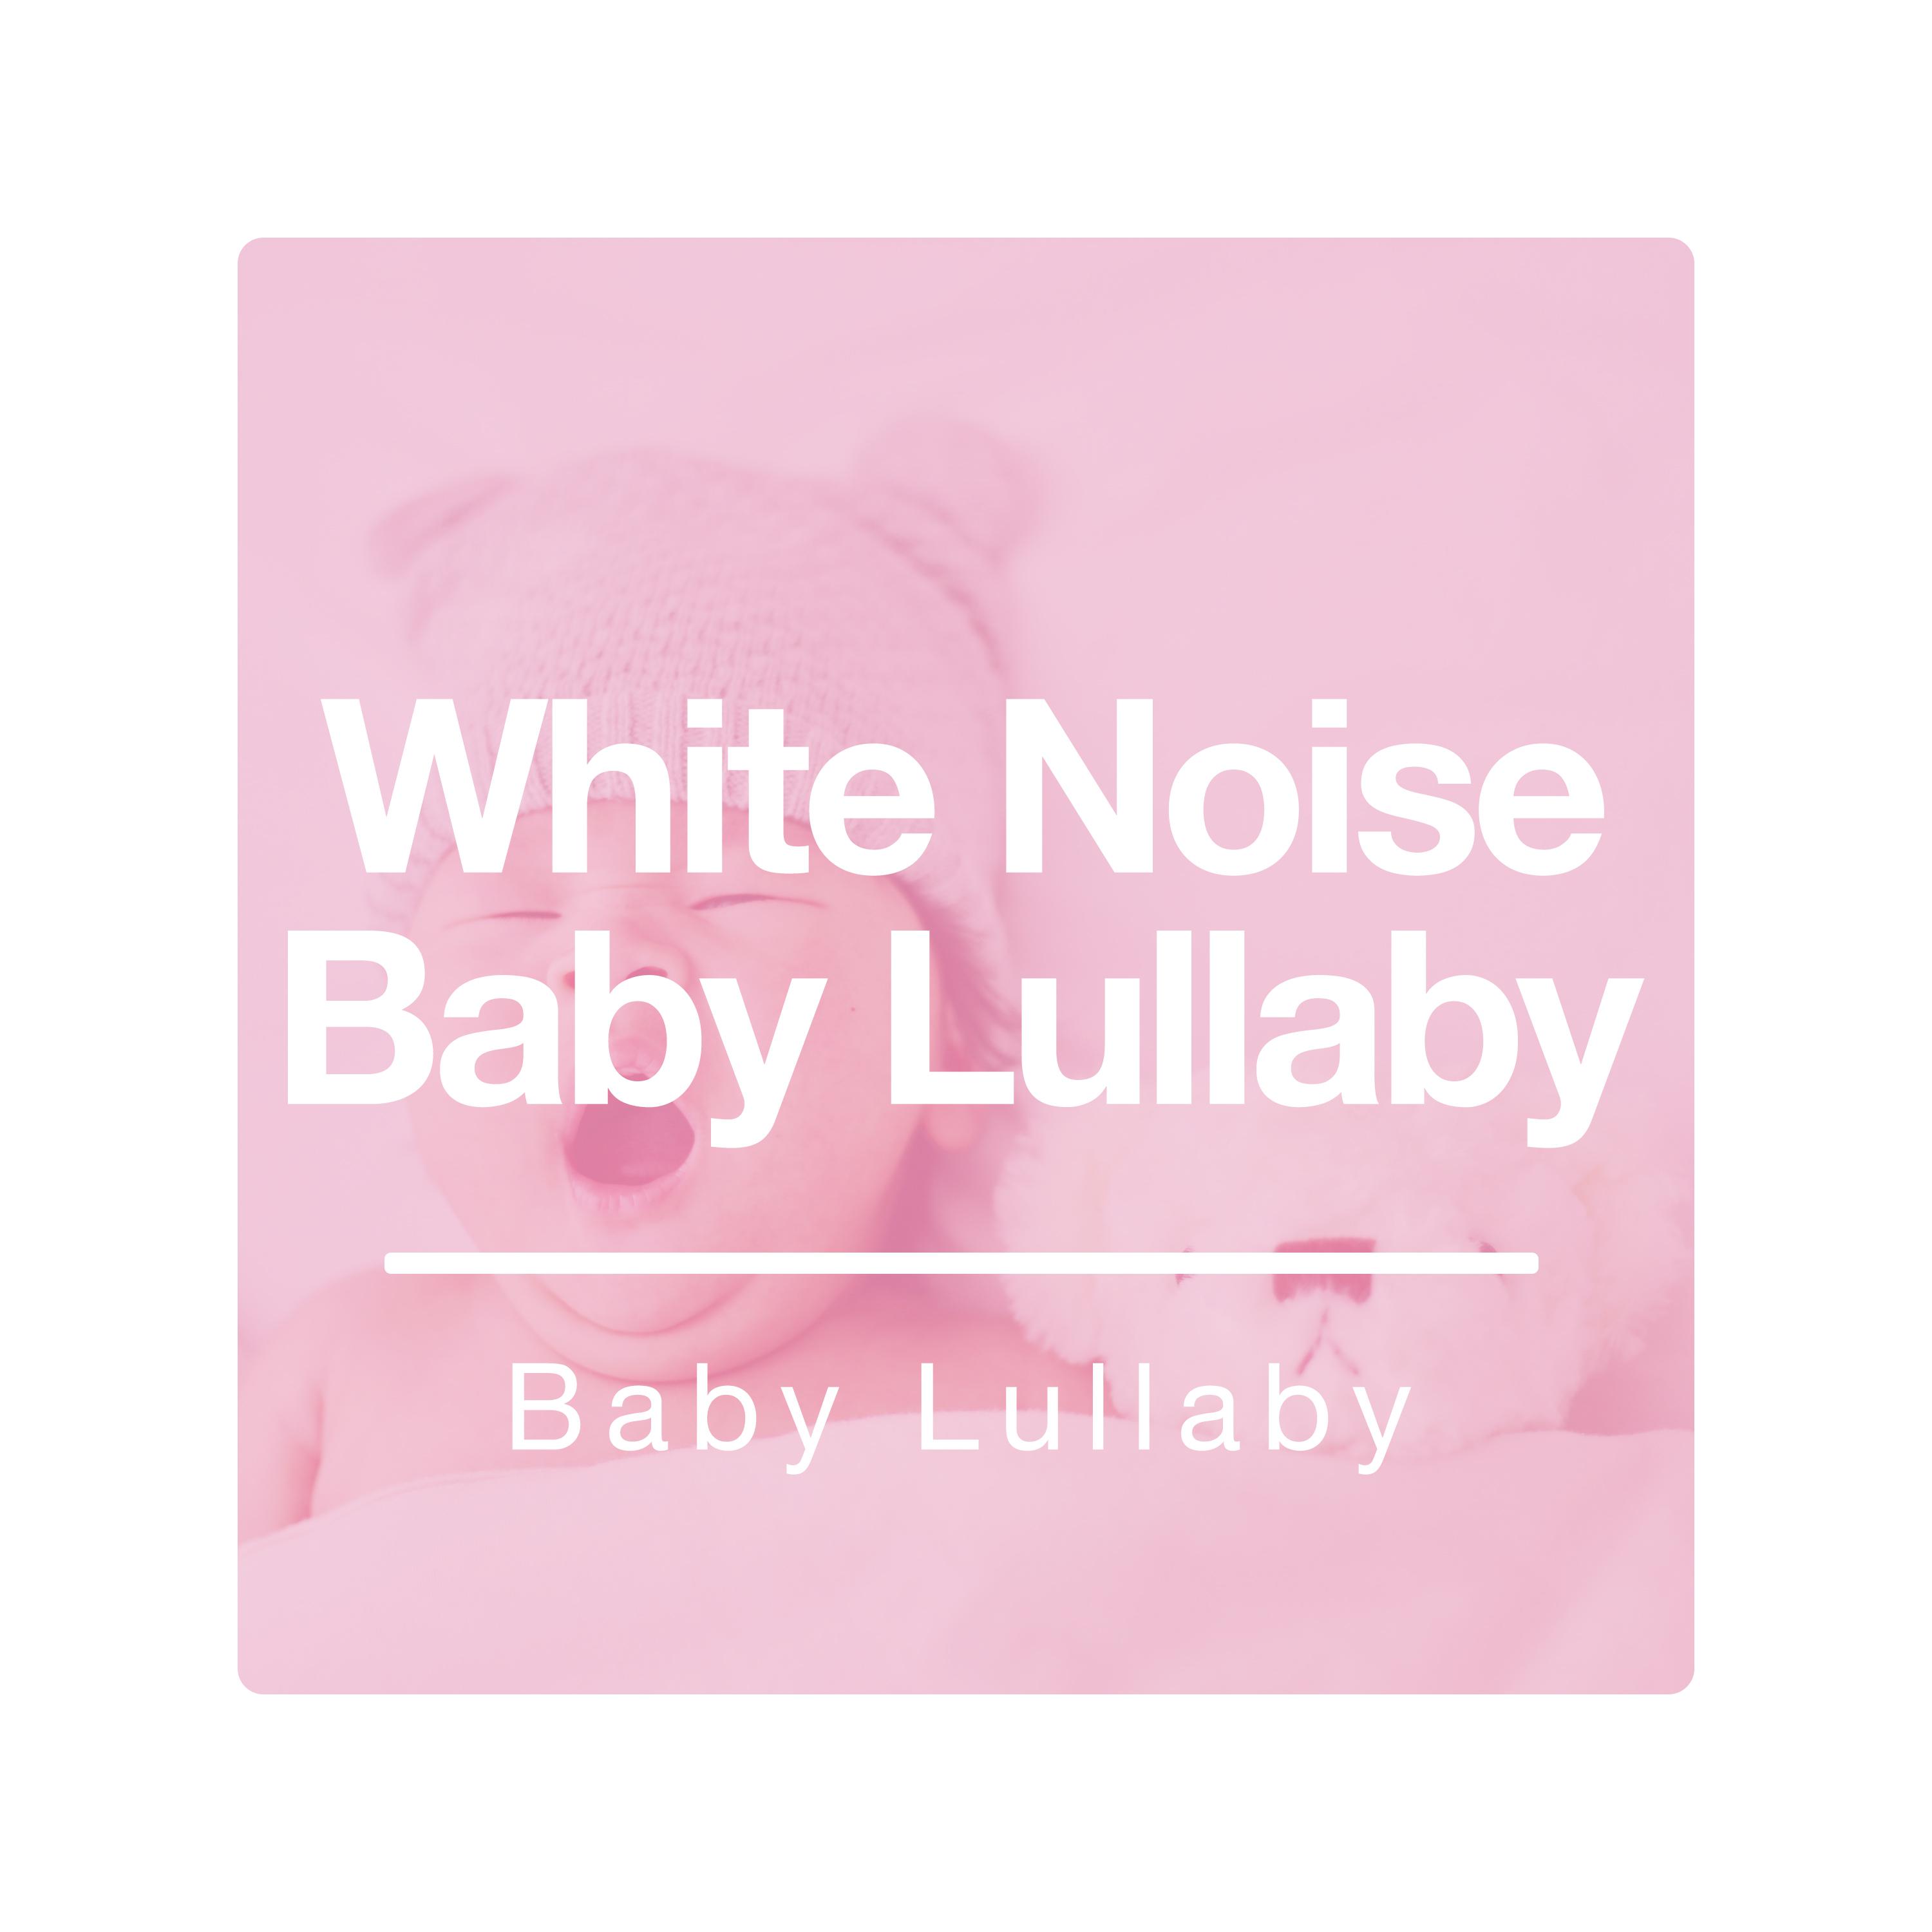 White Noise Baby Lullaby